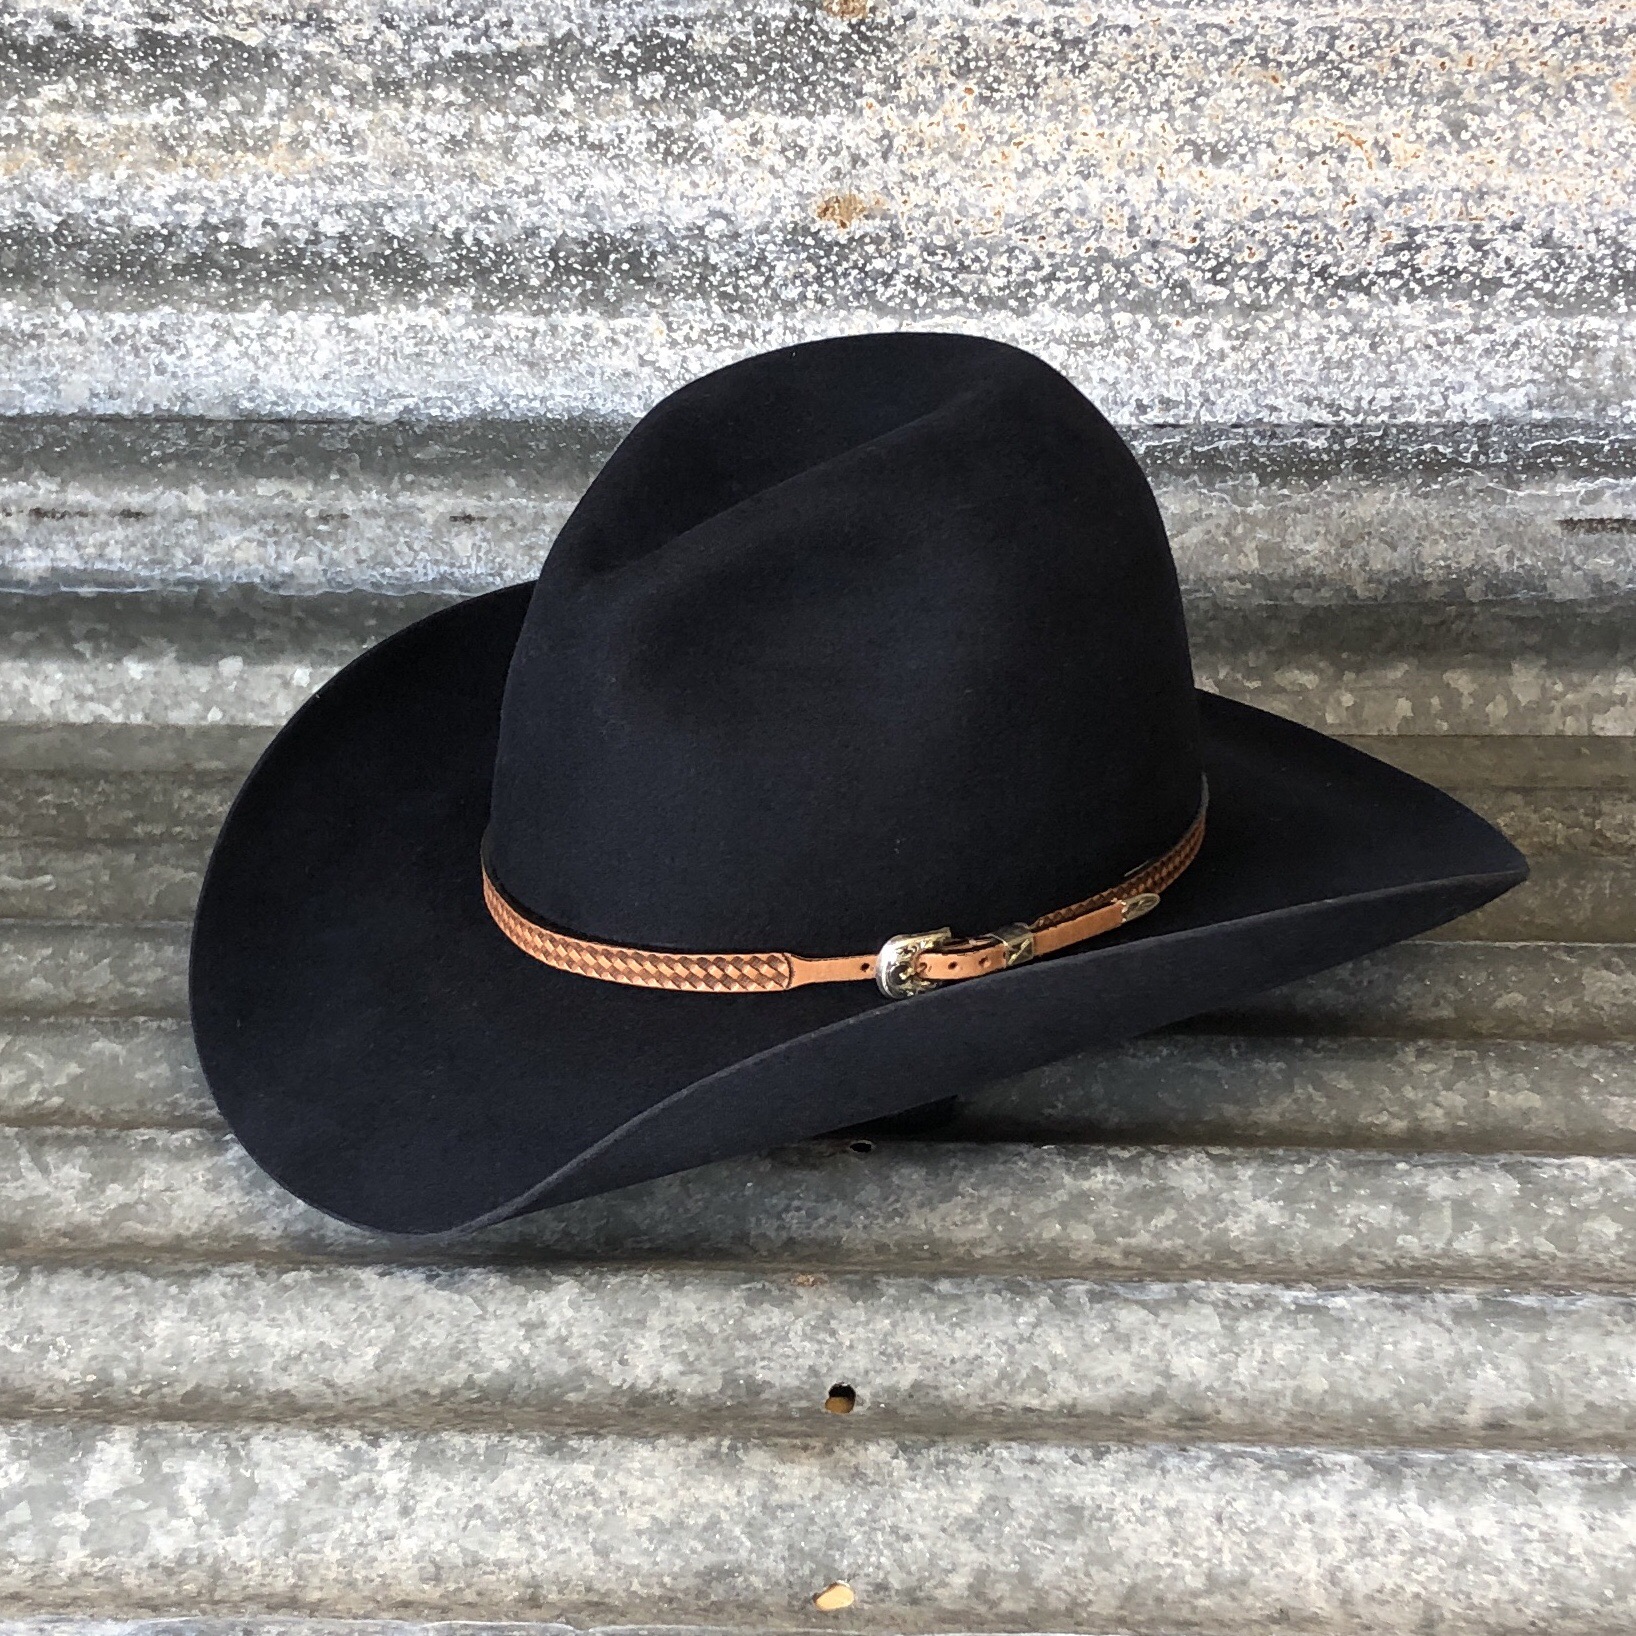 LOW GUS BELLY CURL 3.75" BLACK WITH ANTIQUE BROWN BASKET HAT BAND